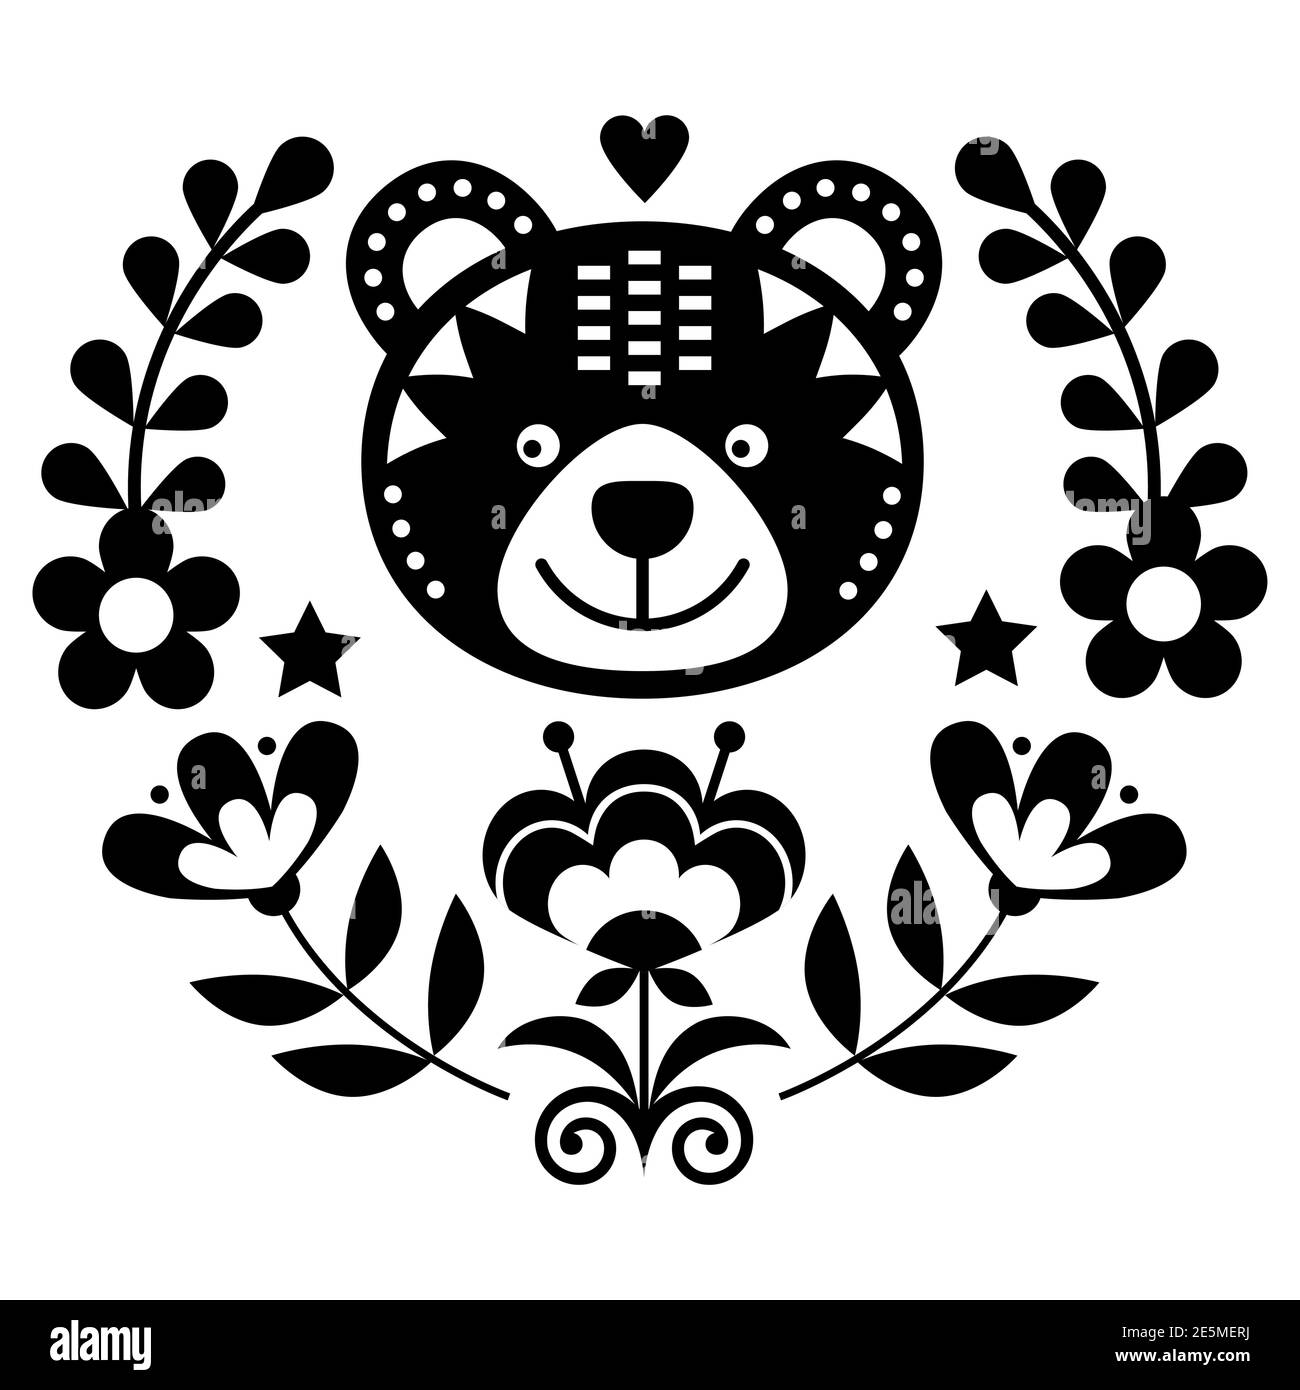 Scandinavian bear folk art vector round pattern with flowers and wreath, Nordic floral black and white greeting card or invitation inspired by traditi Stock Vector